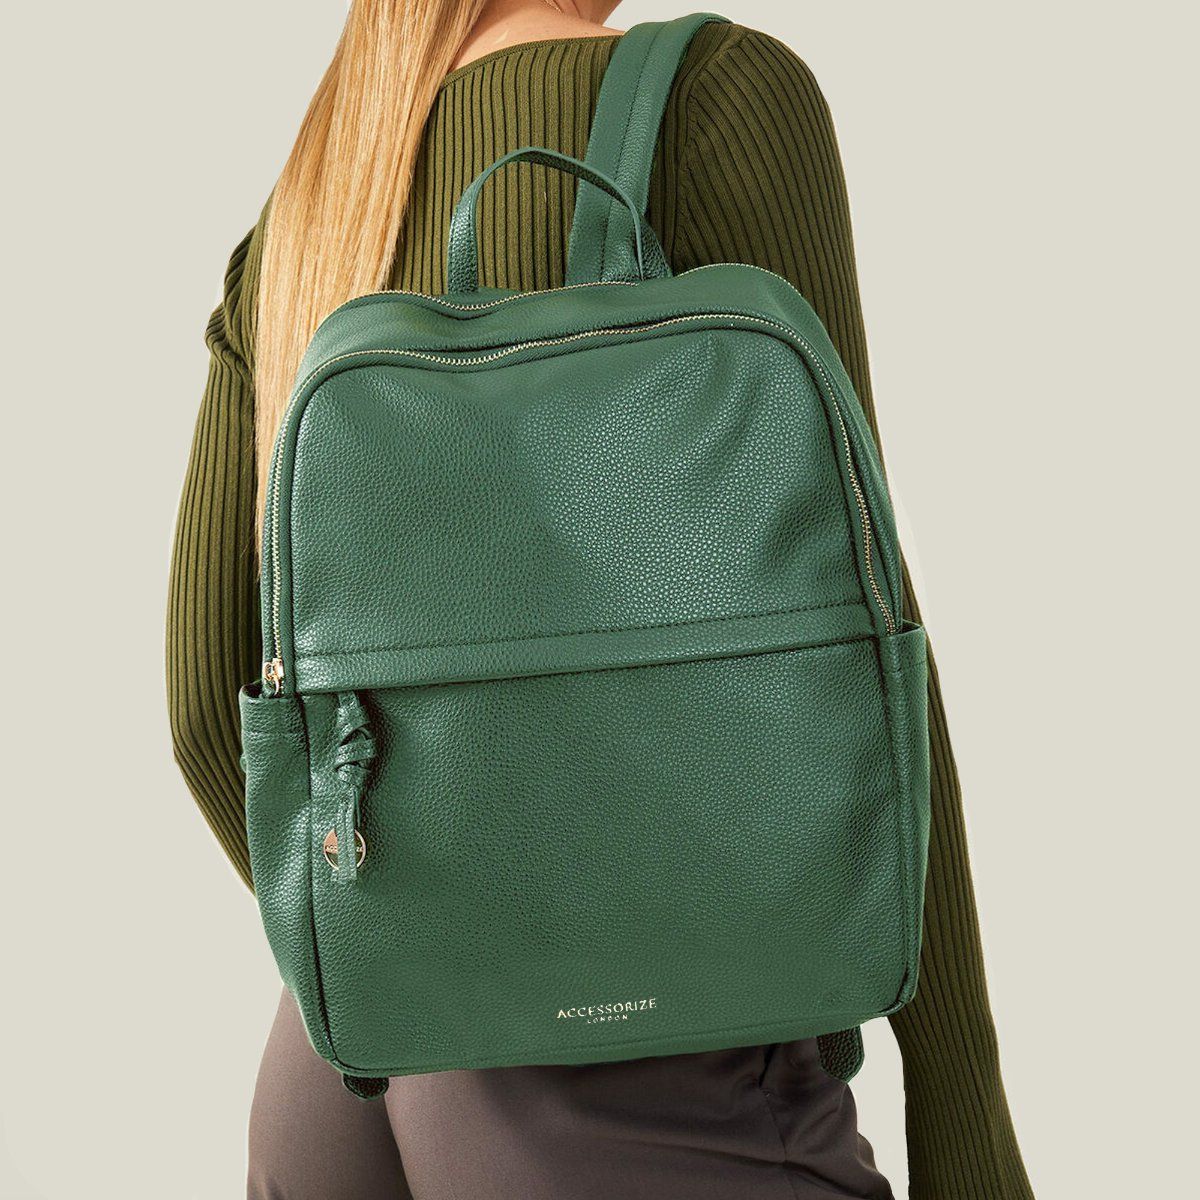 Buy Da Milano Green Leather Women's Backpack at Amazon.in